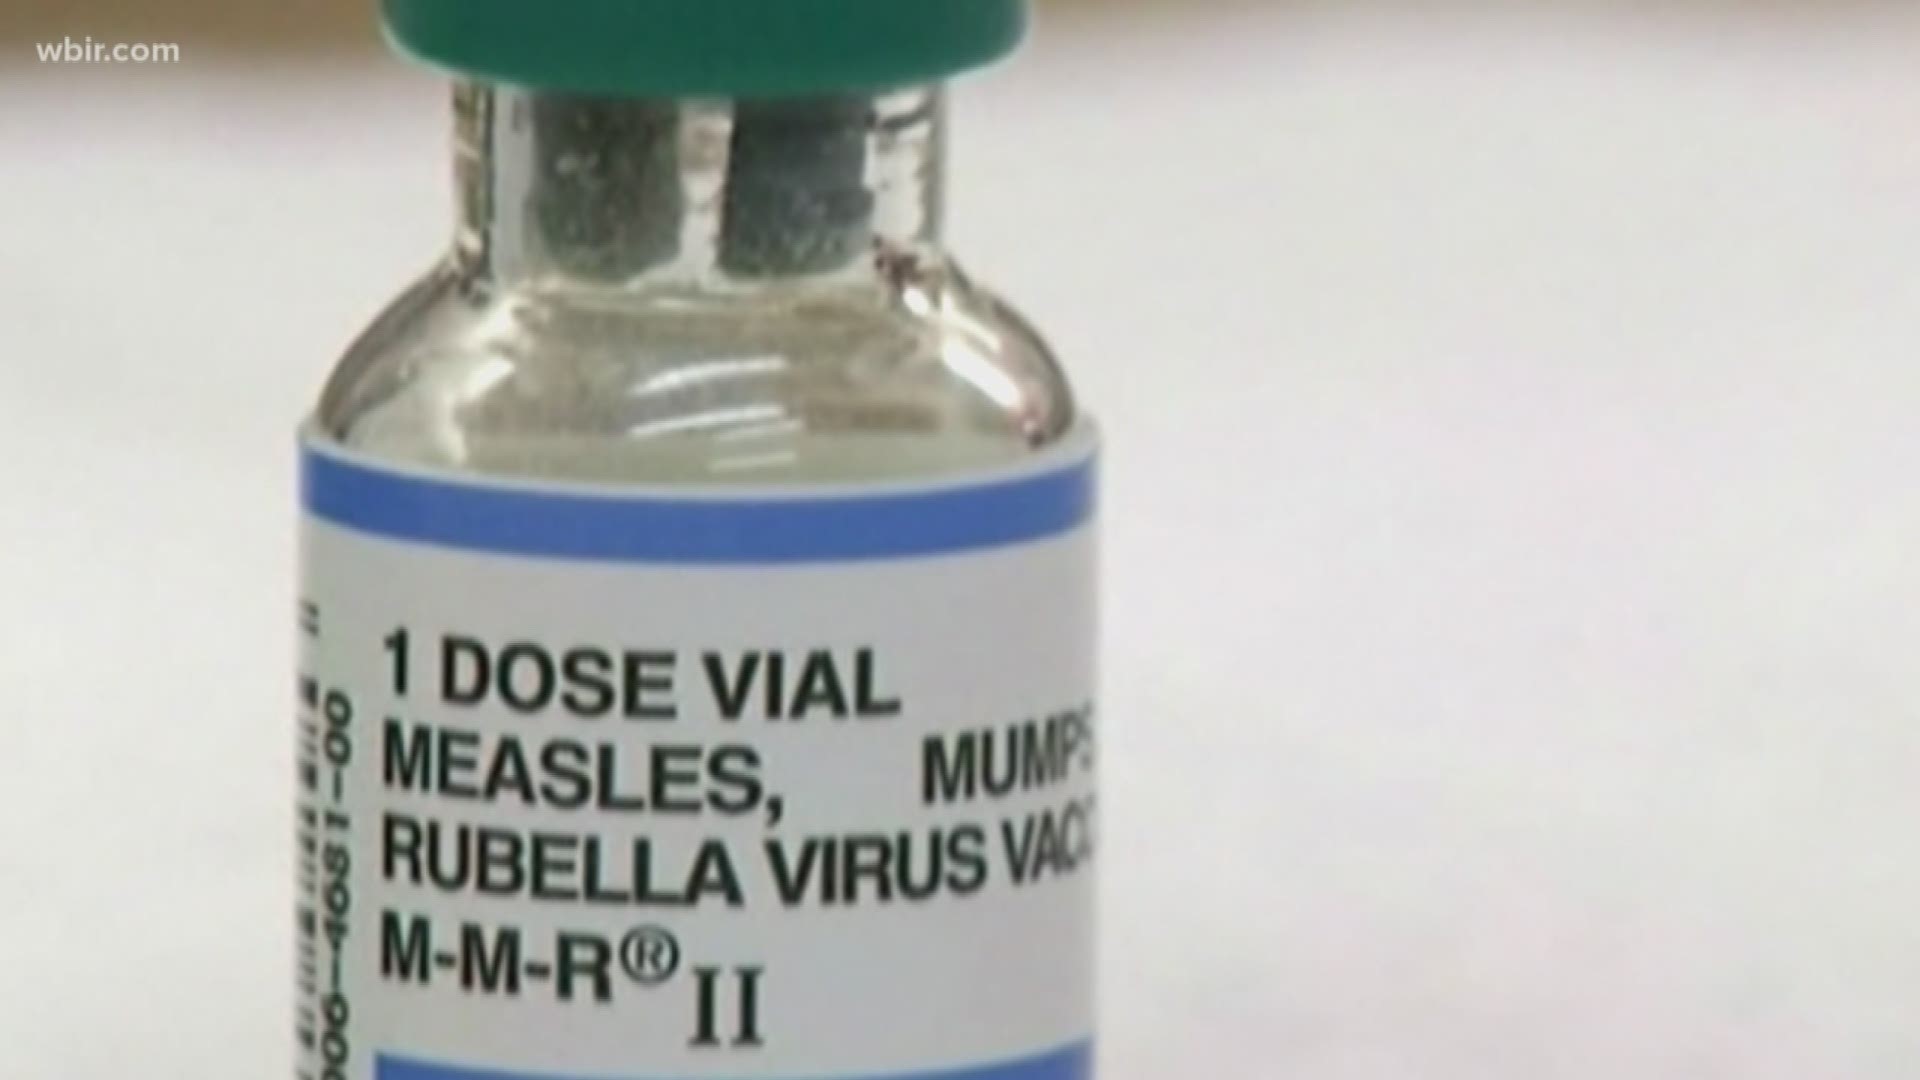 The Tennessee Dept. of Health says that a person in East Tenn. has the measles, but will not release any further info. They said they have contacted more than 600 people who may have come in contact with them.